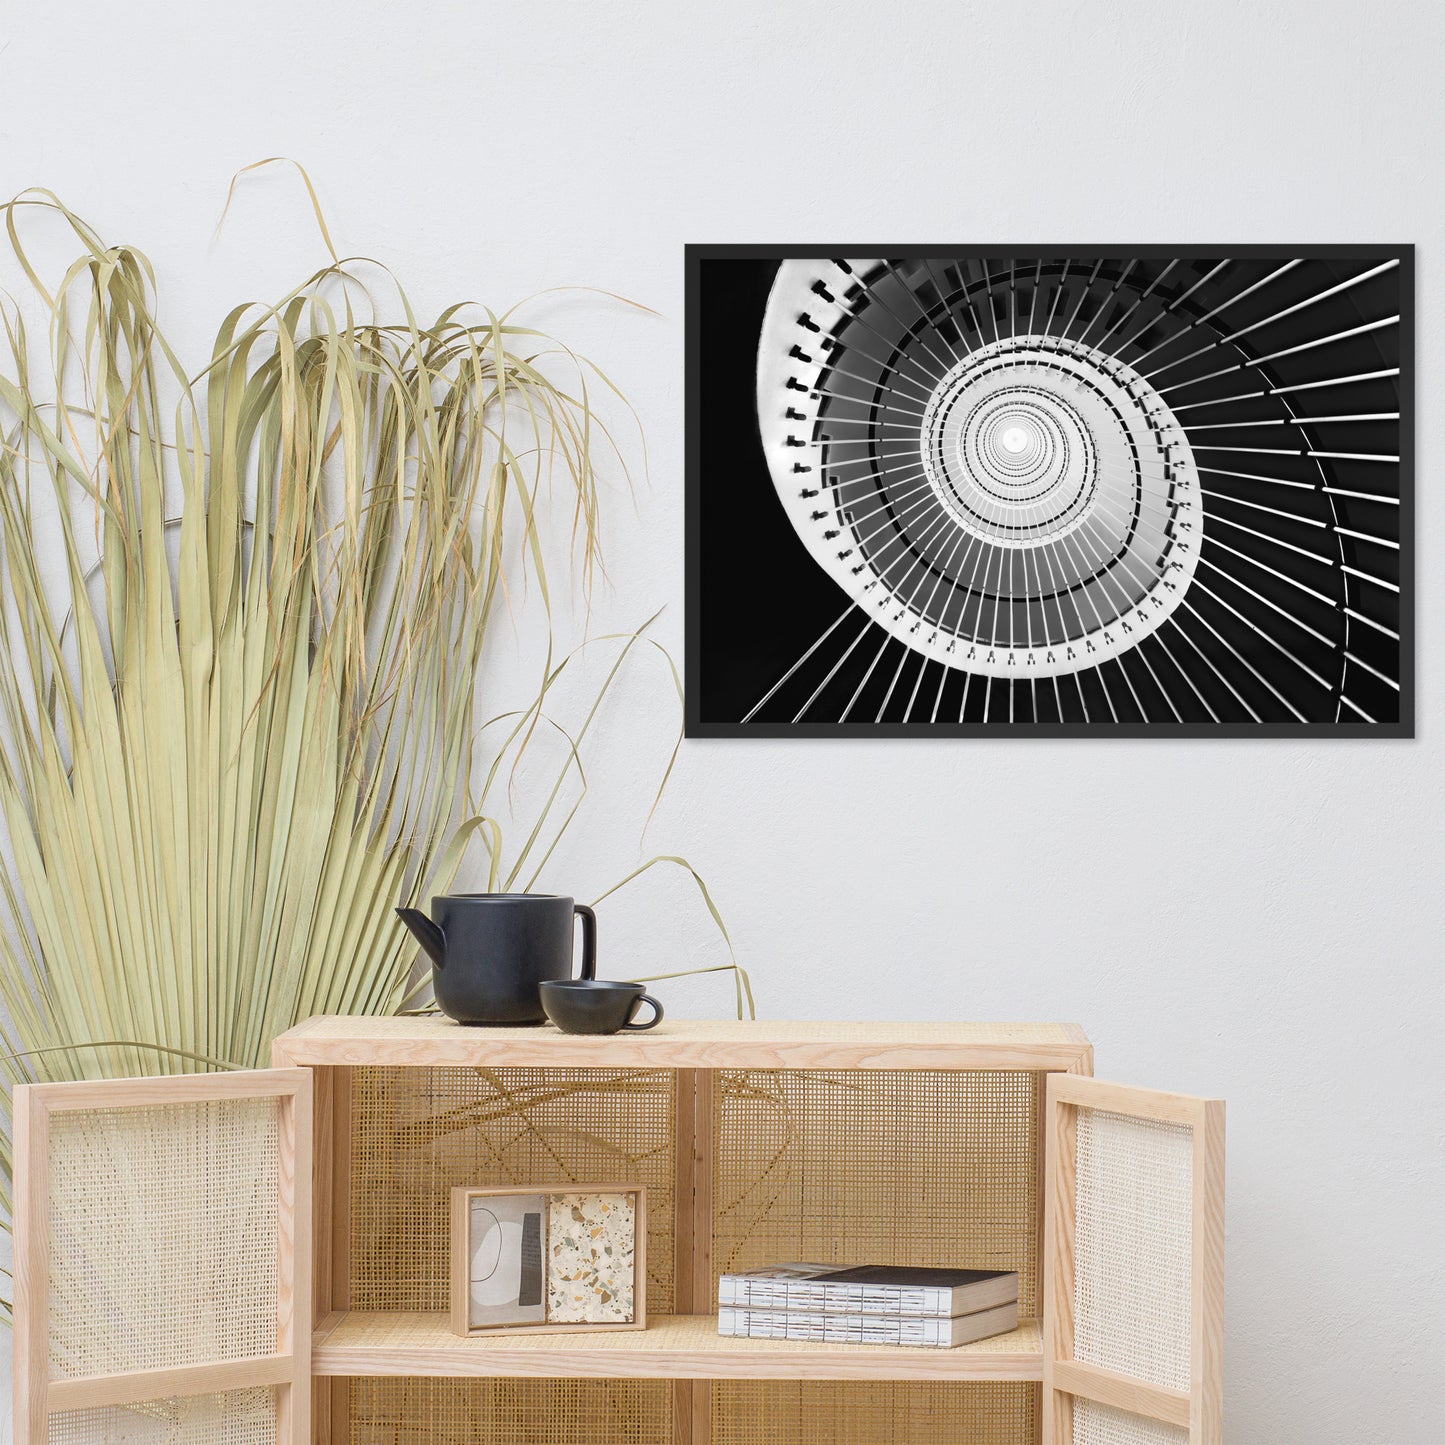 Never Ending Ascent - Equiangular Spiral Black And White Architectural Photograph Framed Wall Art Print